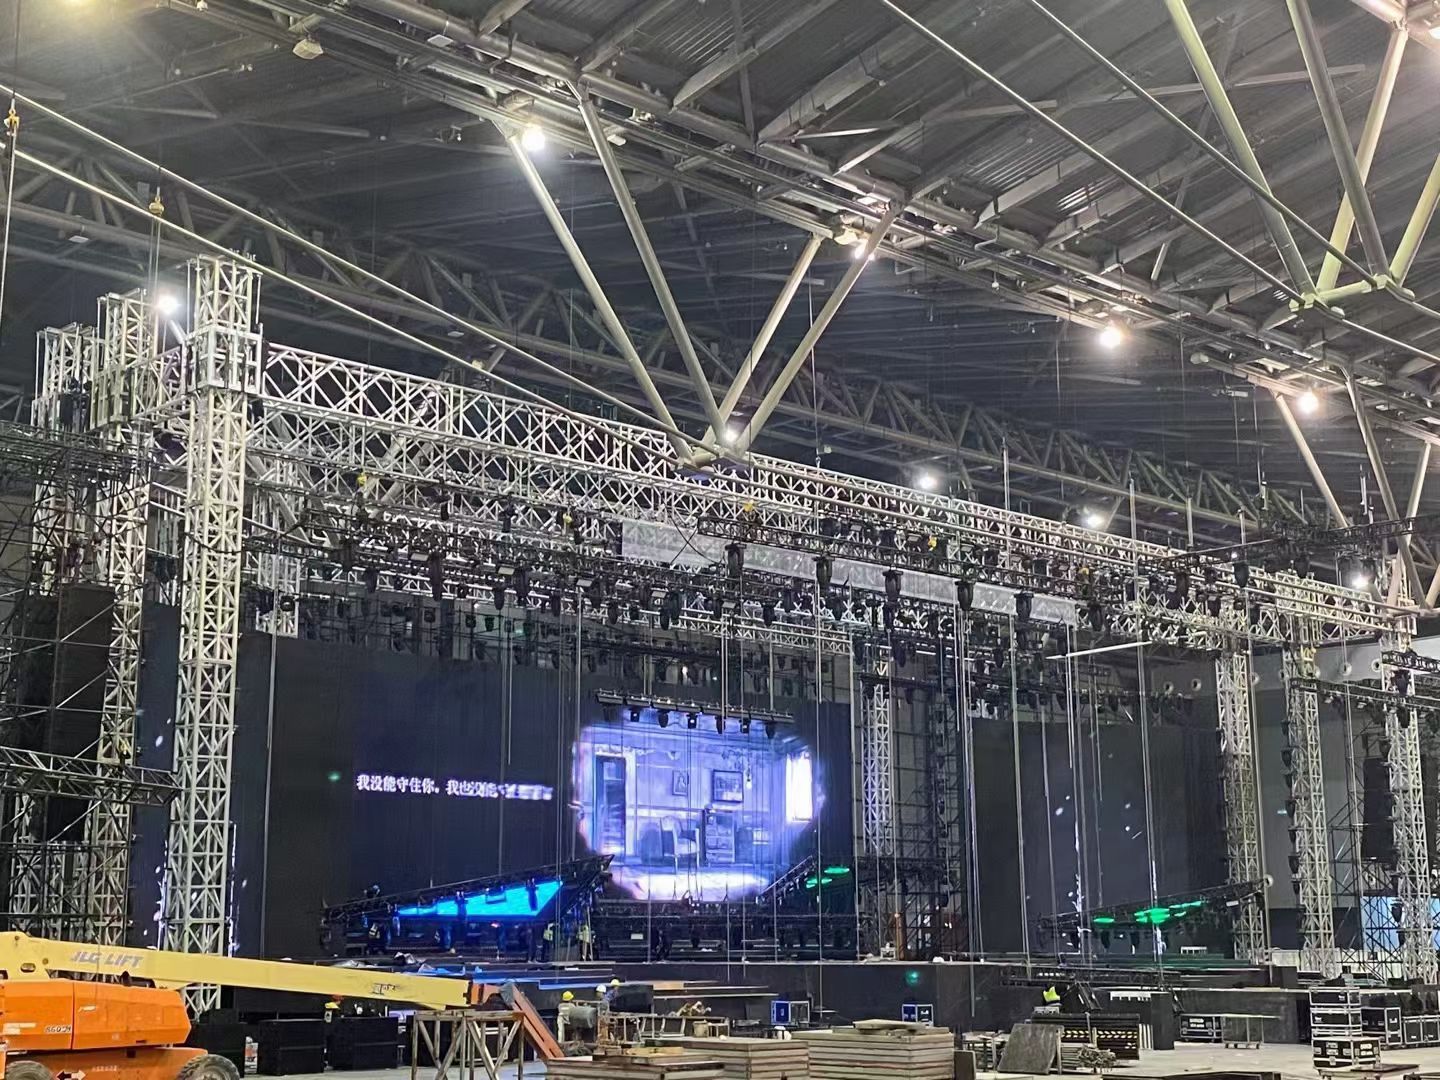 Concert Tour Use Large Span Truss Structure with Wings